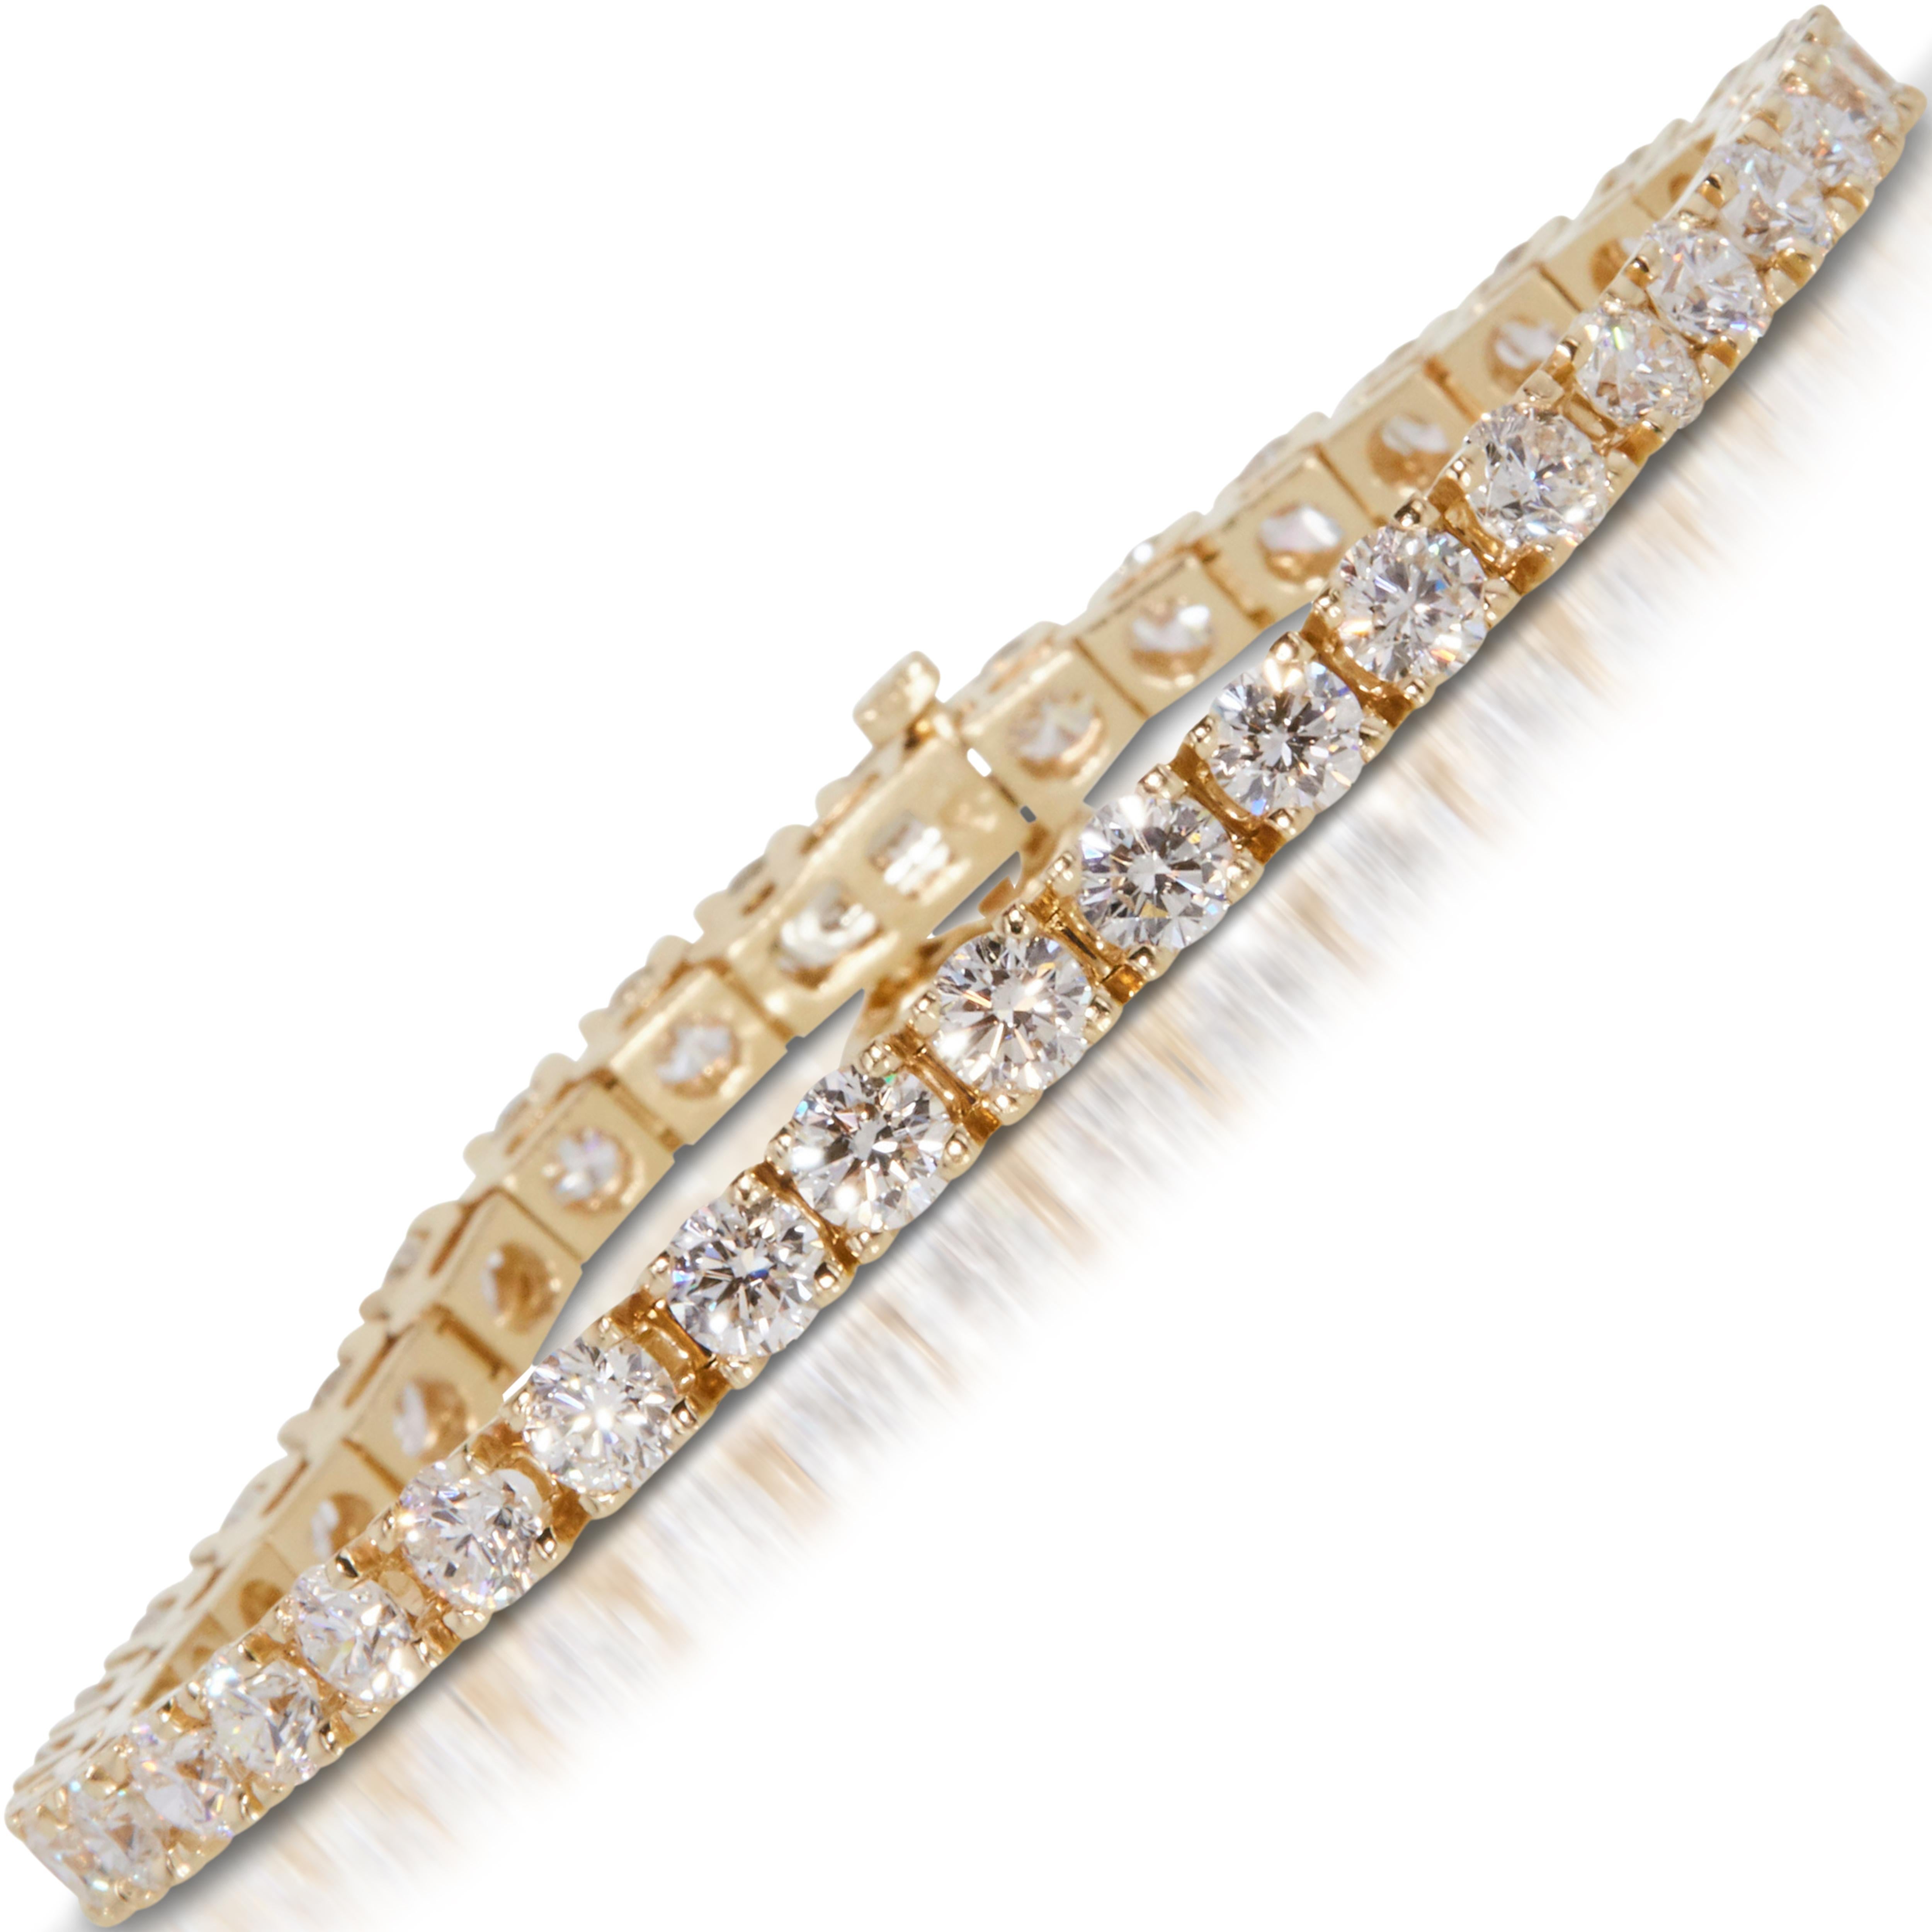 Classic 4 1/2 carat round natural diamond tennis link bracelet in 14k yellow gold. 67 round brilliant natural diamonds (natural earth-mined) are hand set in this diamond tennis bracelet weighing approx. 4 1/2 carats.


This approx. 4 1/2 carat